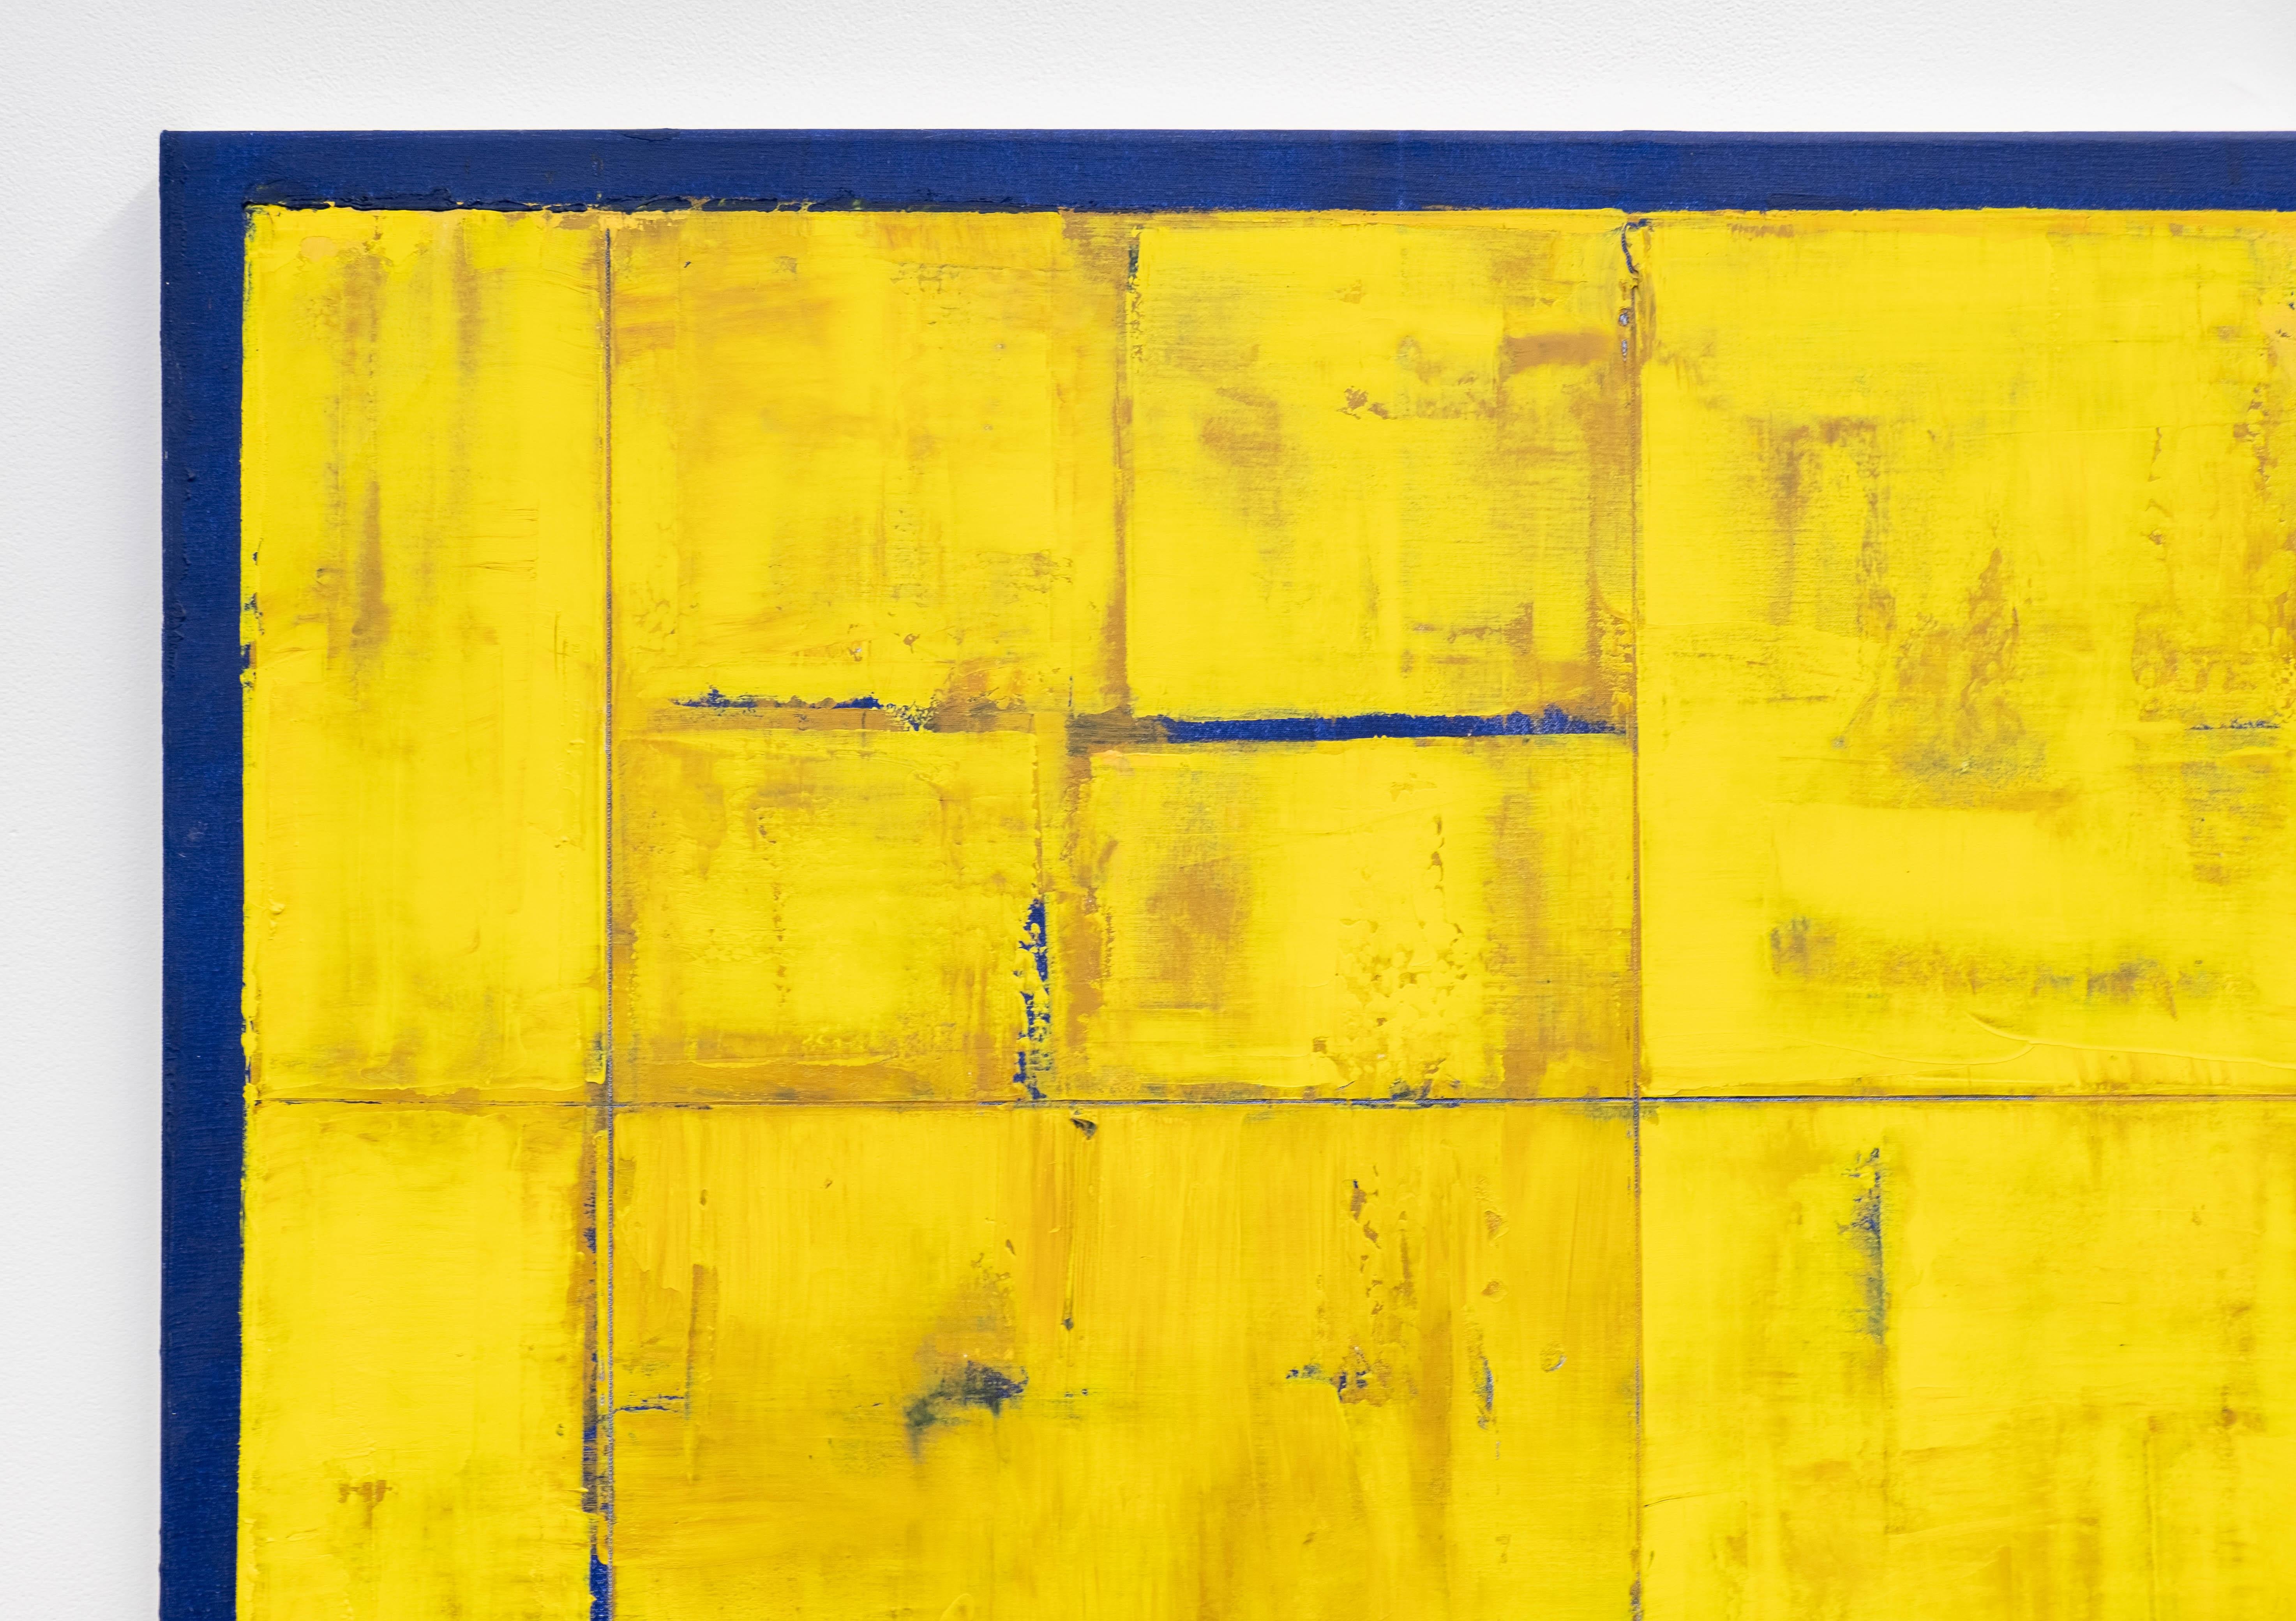 This gorgeous luminous abstract painting drenched in bright yellow is enhanced by a subtle melange of greens, orange, blue and rich brown. This is direct from the estate collection of David Sorensen. His Accumulation Grid (AC) series of paintings